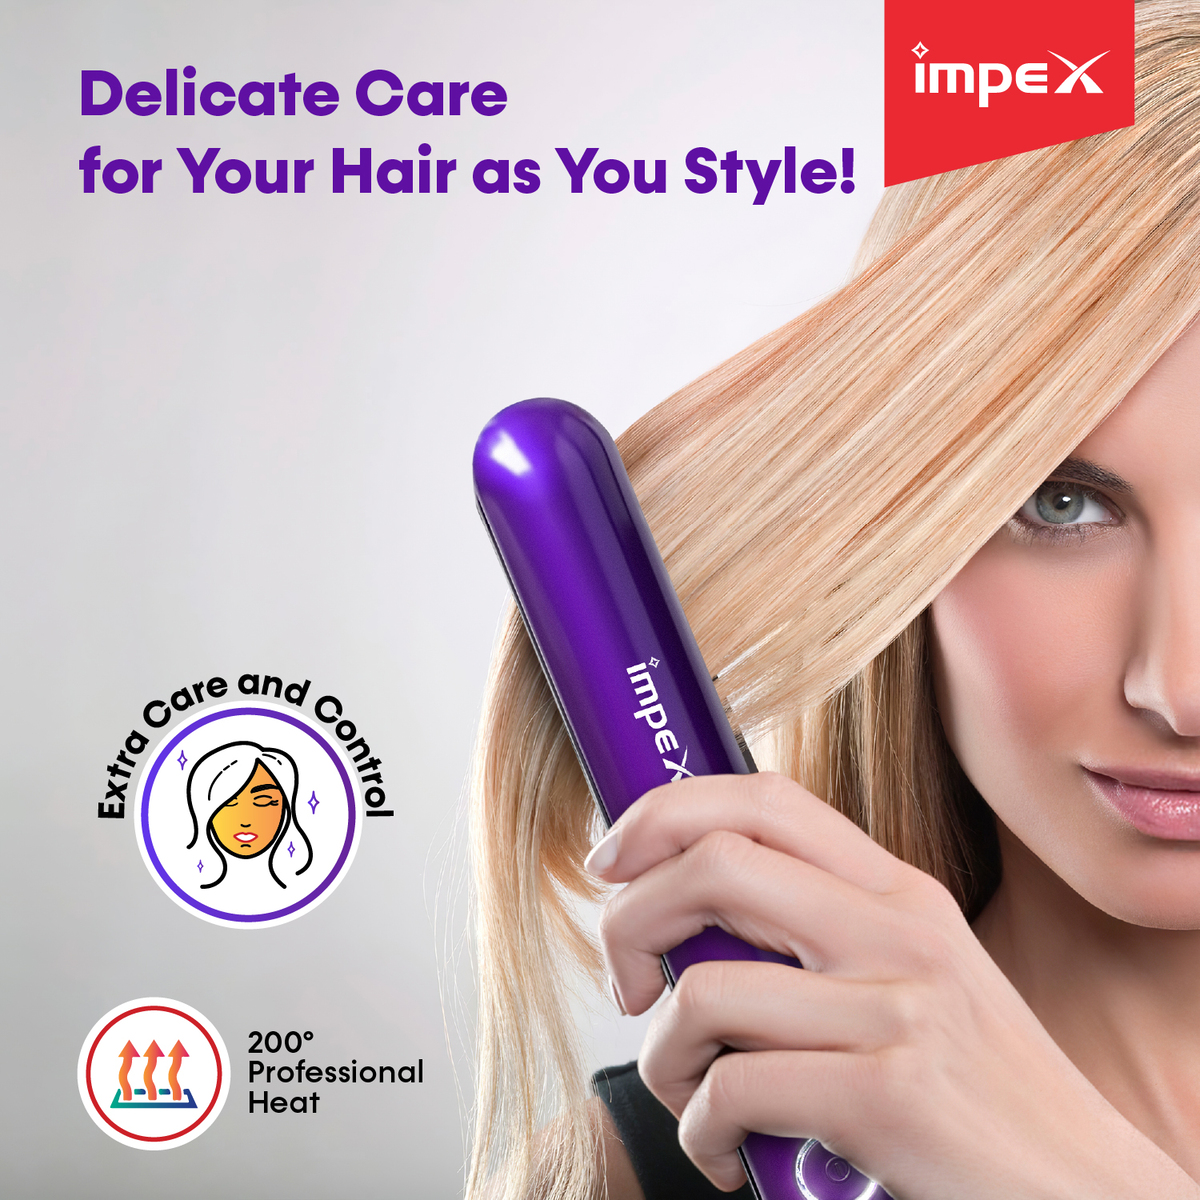 Impex HS 302 Hair Straightener featuring PTC Fast Heating